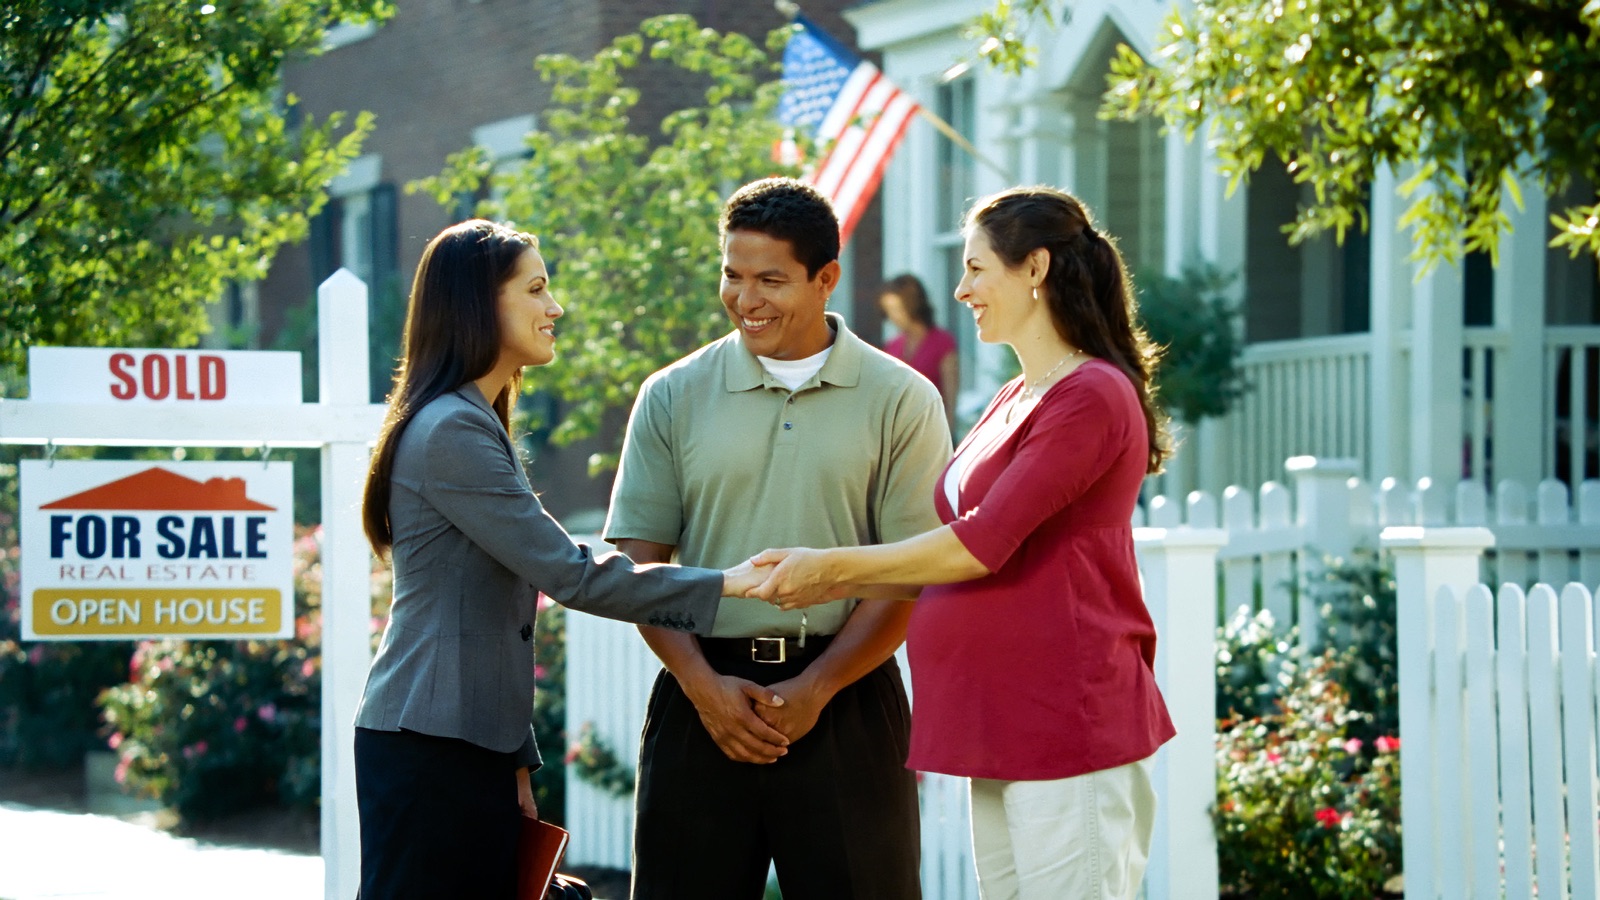 A young couple purchases a new home from a real estate agent.